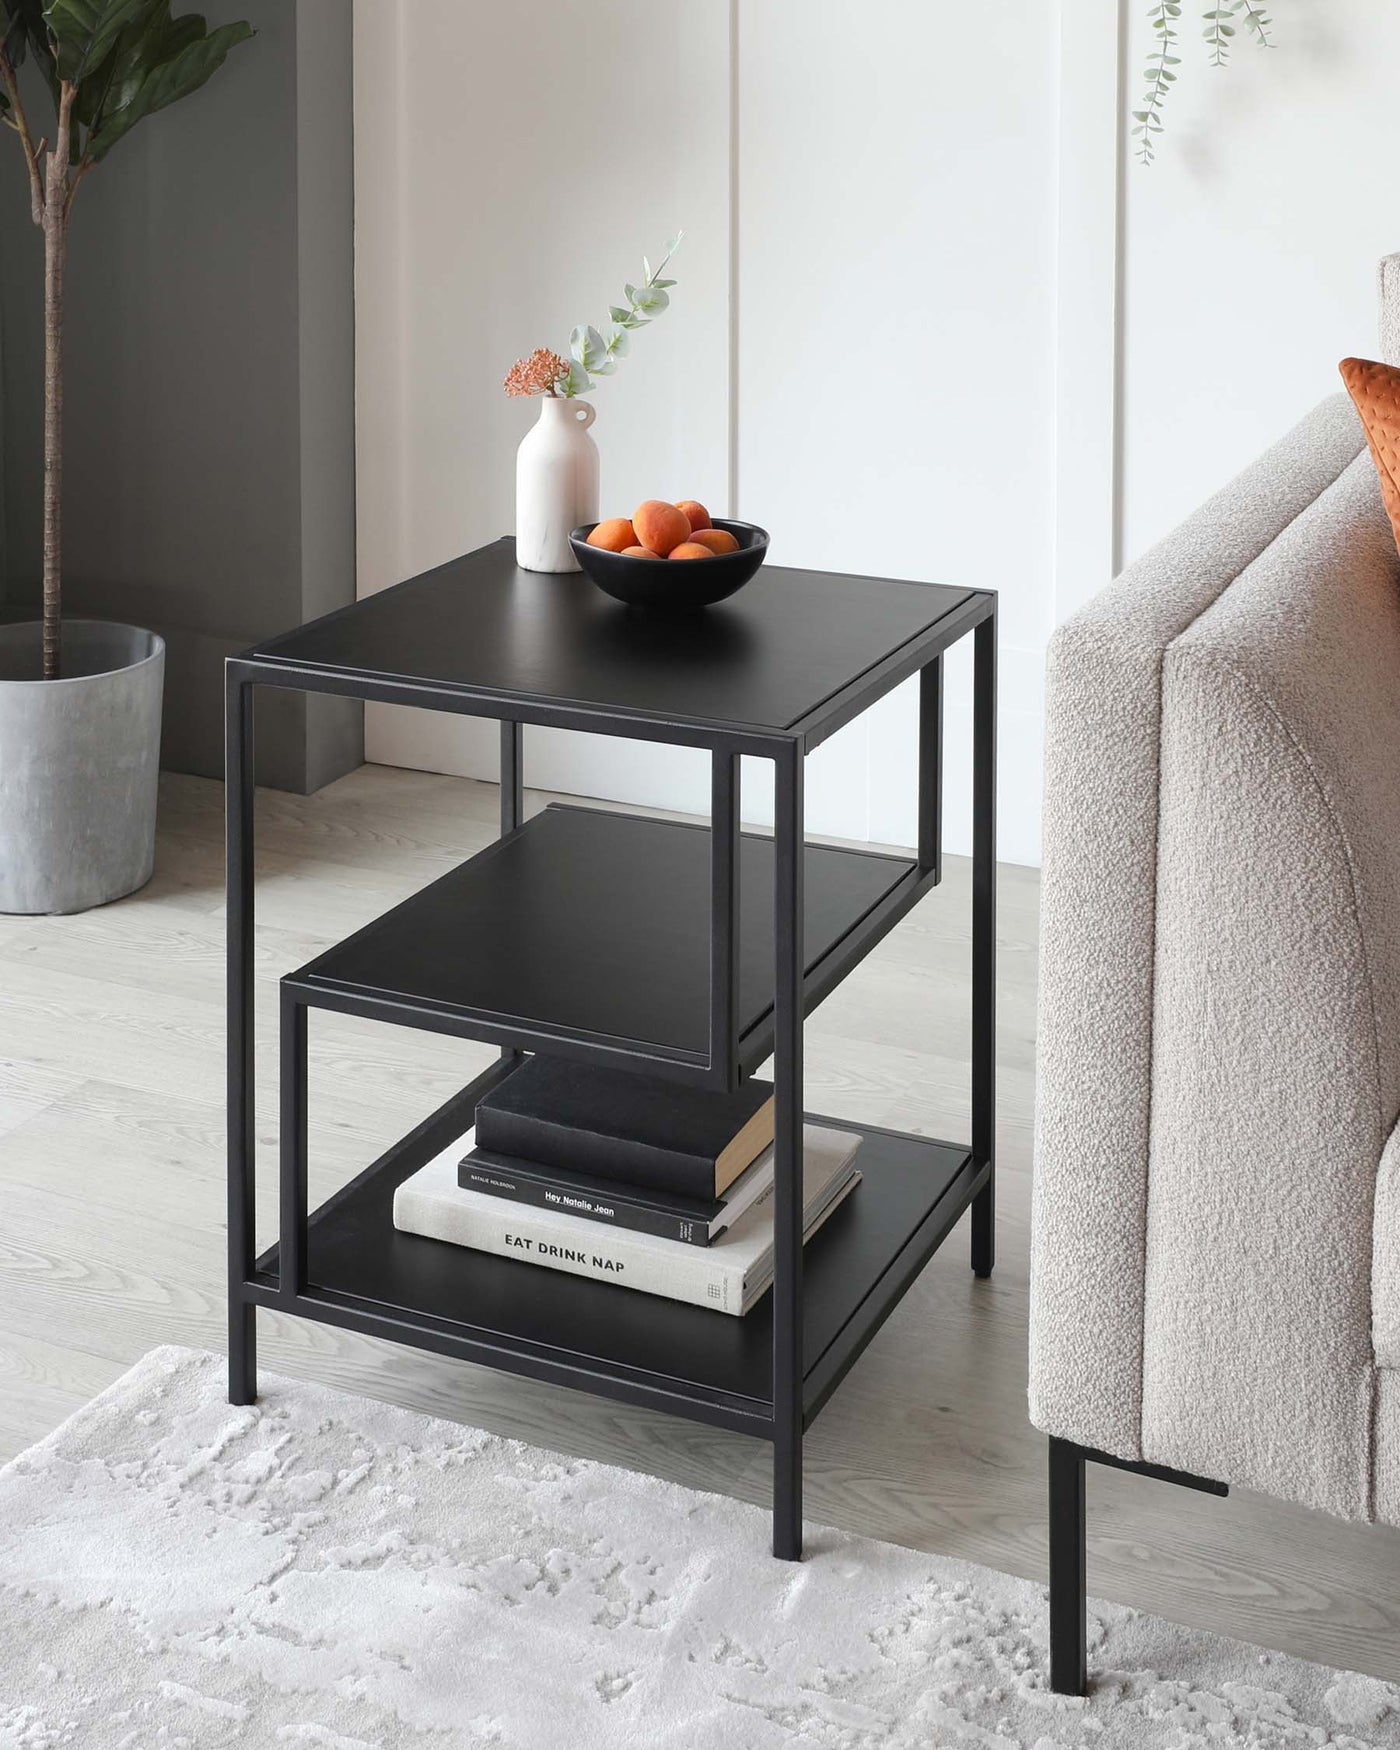 A modern, black, two-tiered square side table with a metal frame and a flat, square top surface, resting on four straight, square-cut legs. The lower shelf holds books, while the upper surface is styled with a white vase with flowers and a bowl of oranges. The table is set against a neutral background, with a grey upholstered sofa arm to the right, a houseplant to the left, and a light-grey area rug beneath.